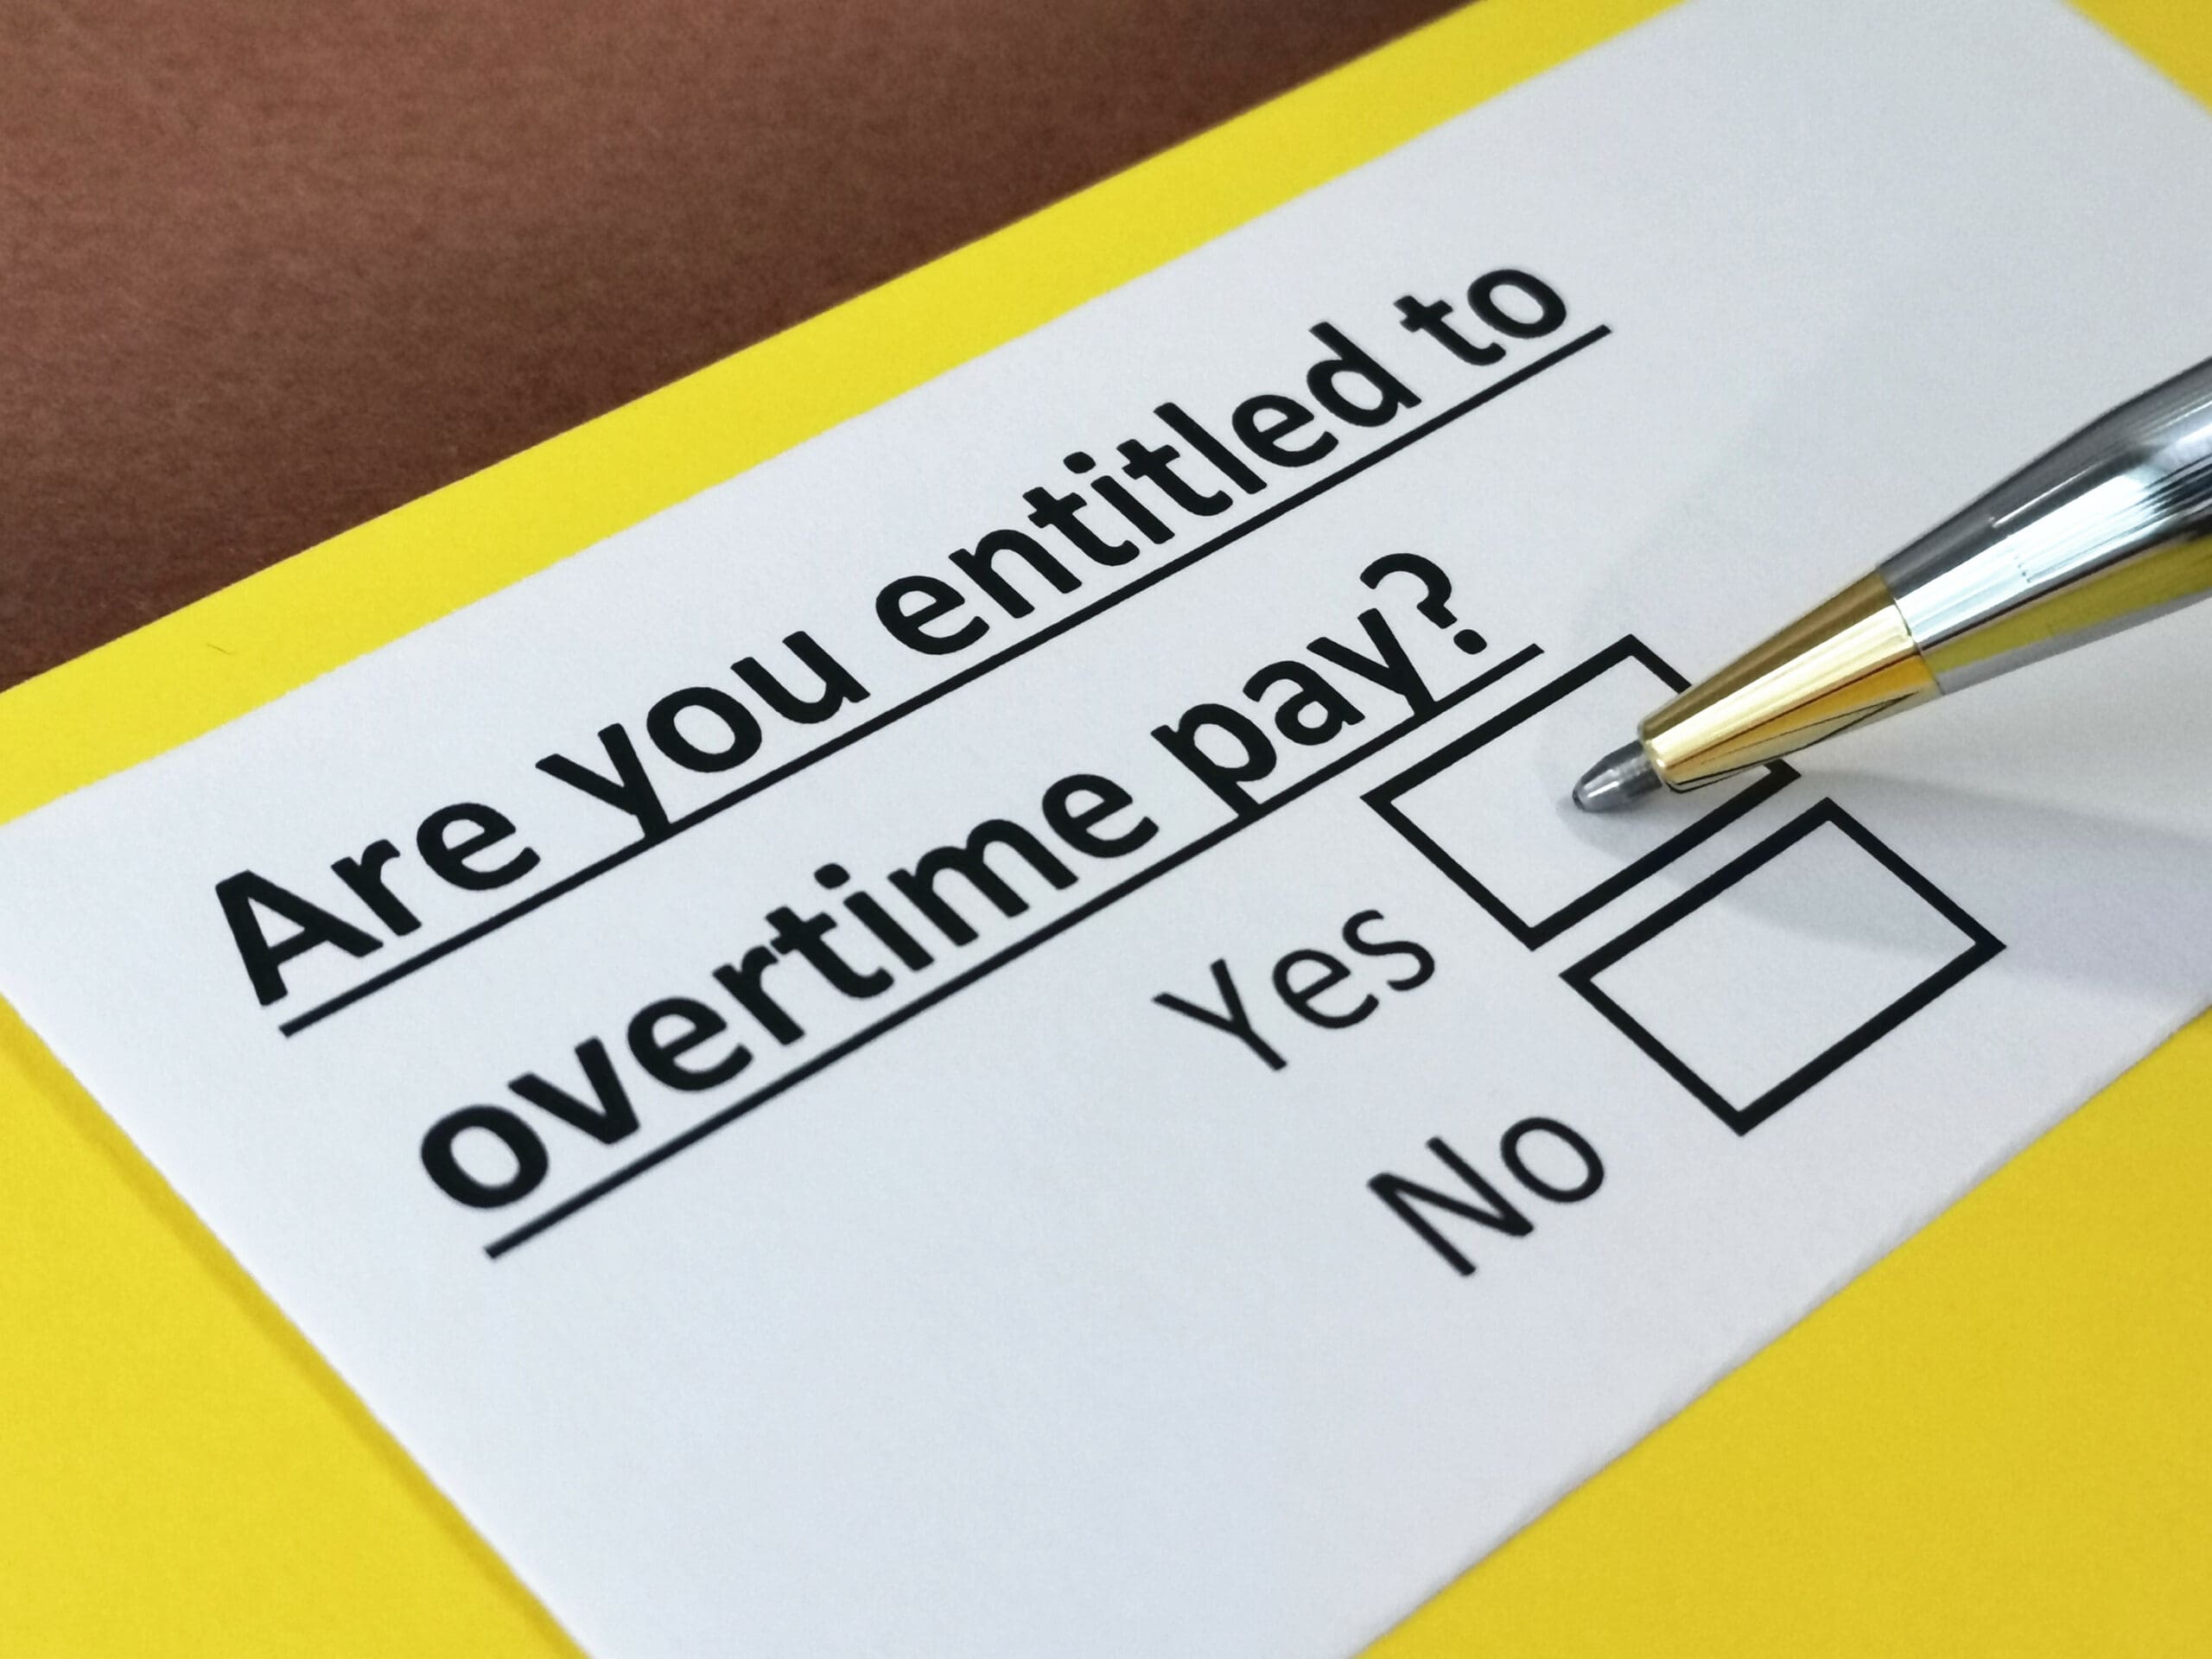 Text: Are you entitled to overtime pay?